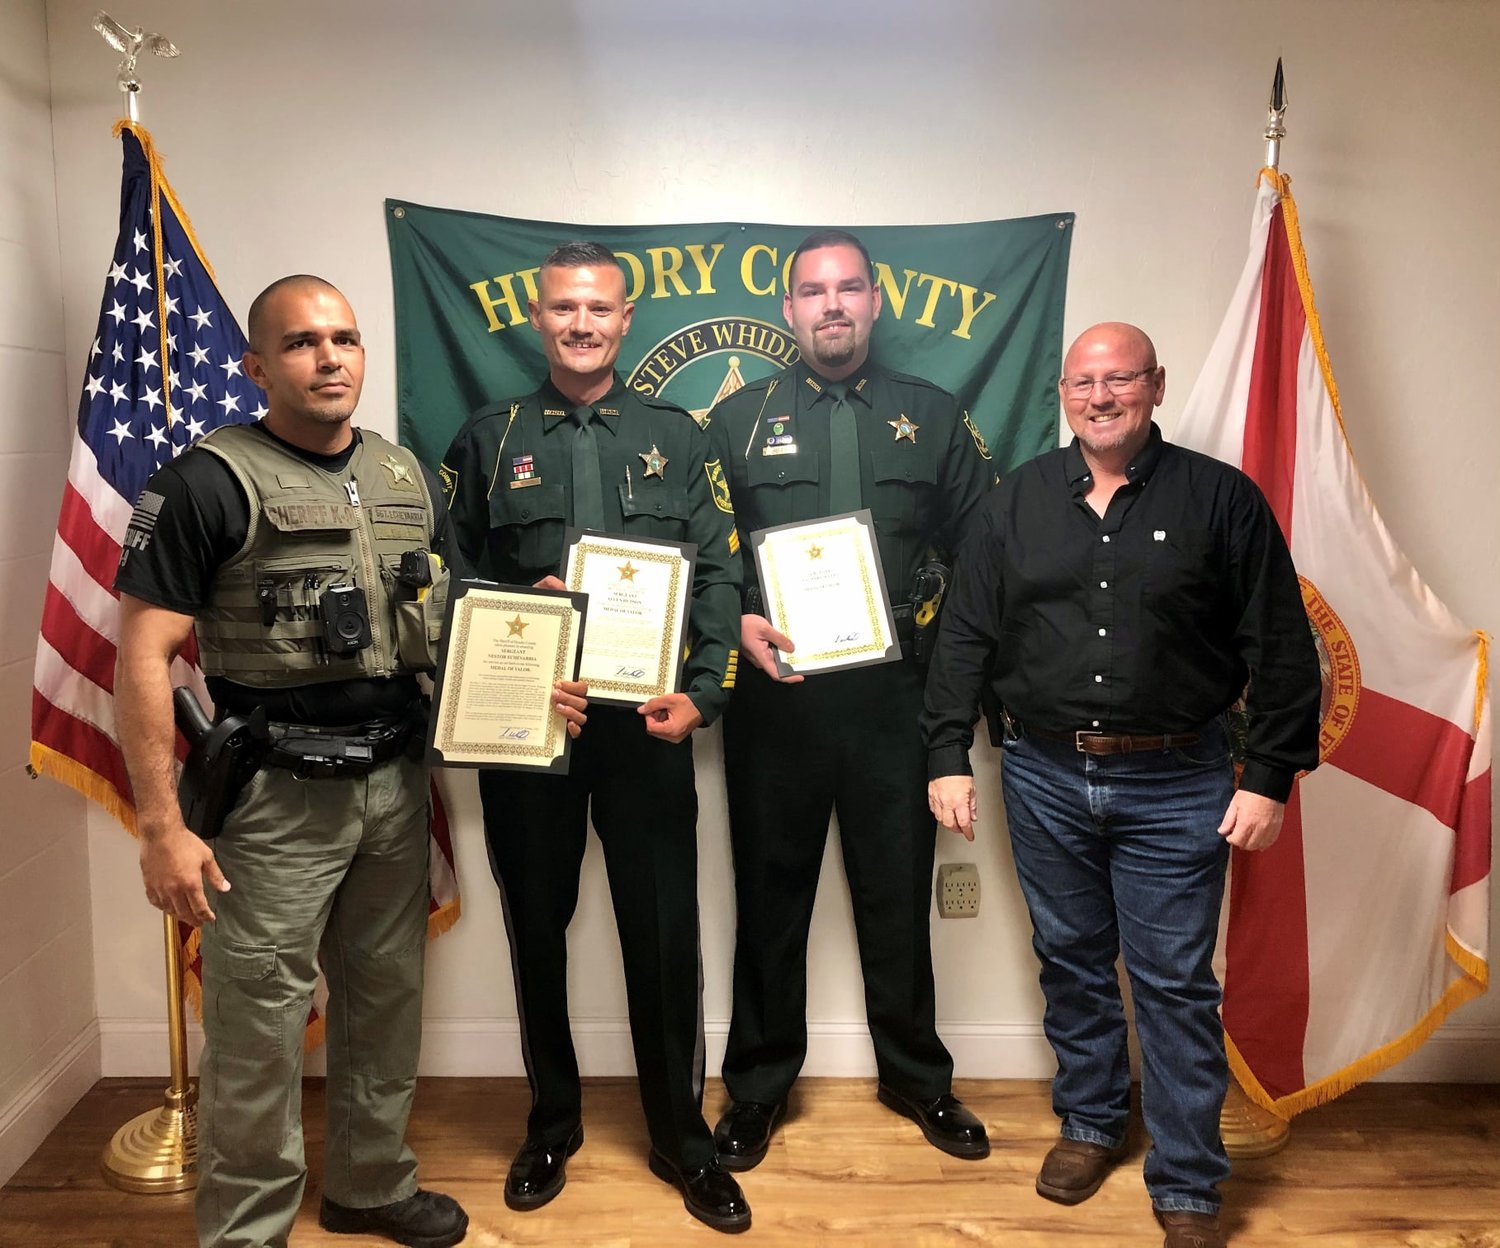 At the Oct. 6, Hendry County Sheriff's Office Quarterly Awards Ceremony Sgt.  Zachary Scelfo, Sgt.  Nester Echevarria and Sgt.  Allen Hudson were each presented with the “Medal of Valor”.